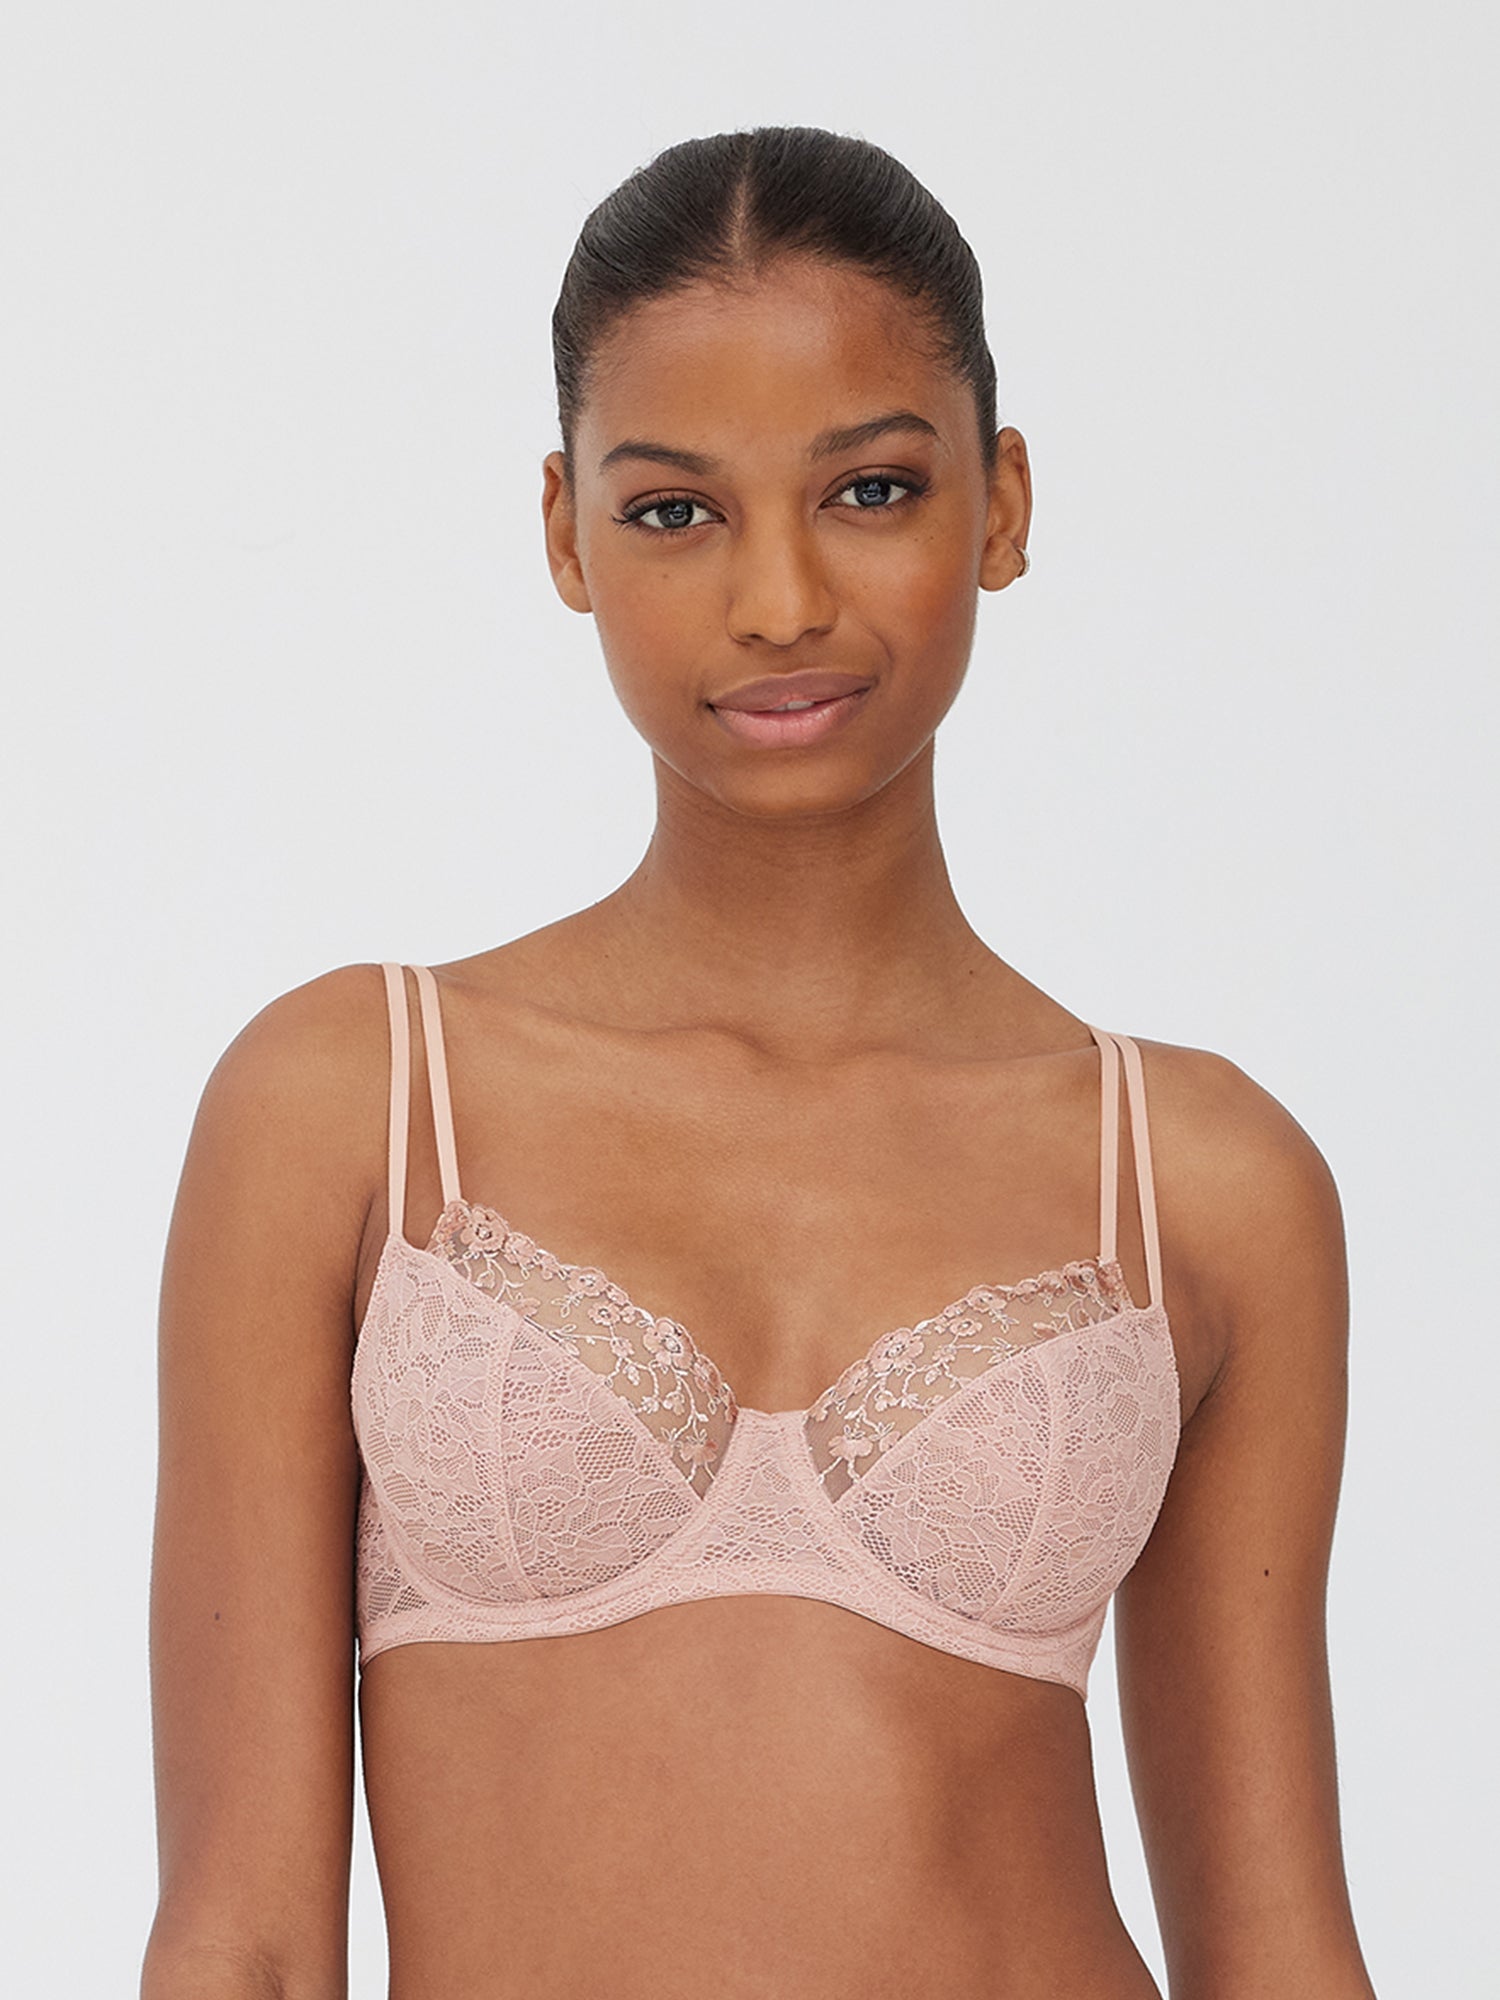 Tulle Lace 336 - 8 Passion lace – Bra Builders